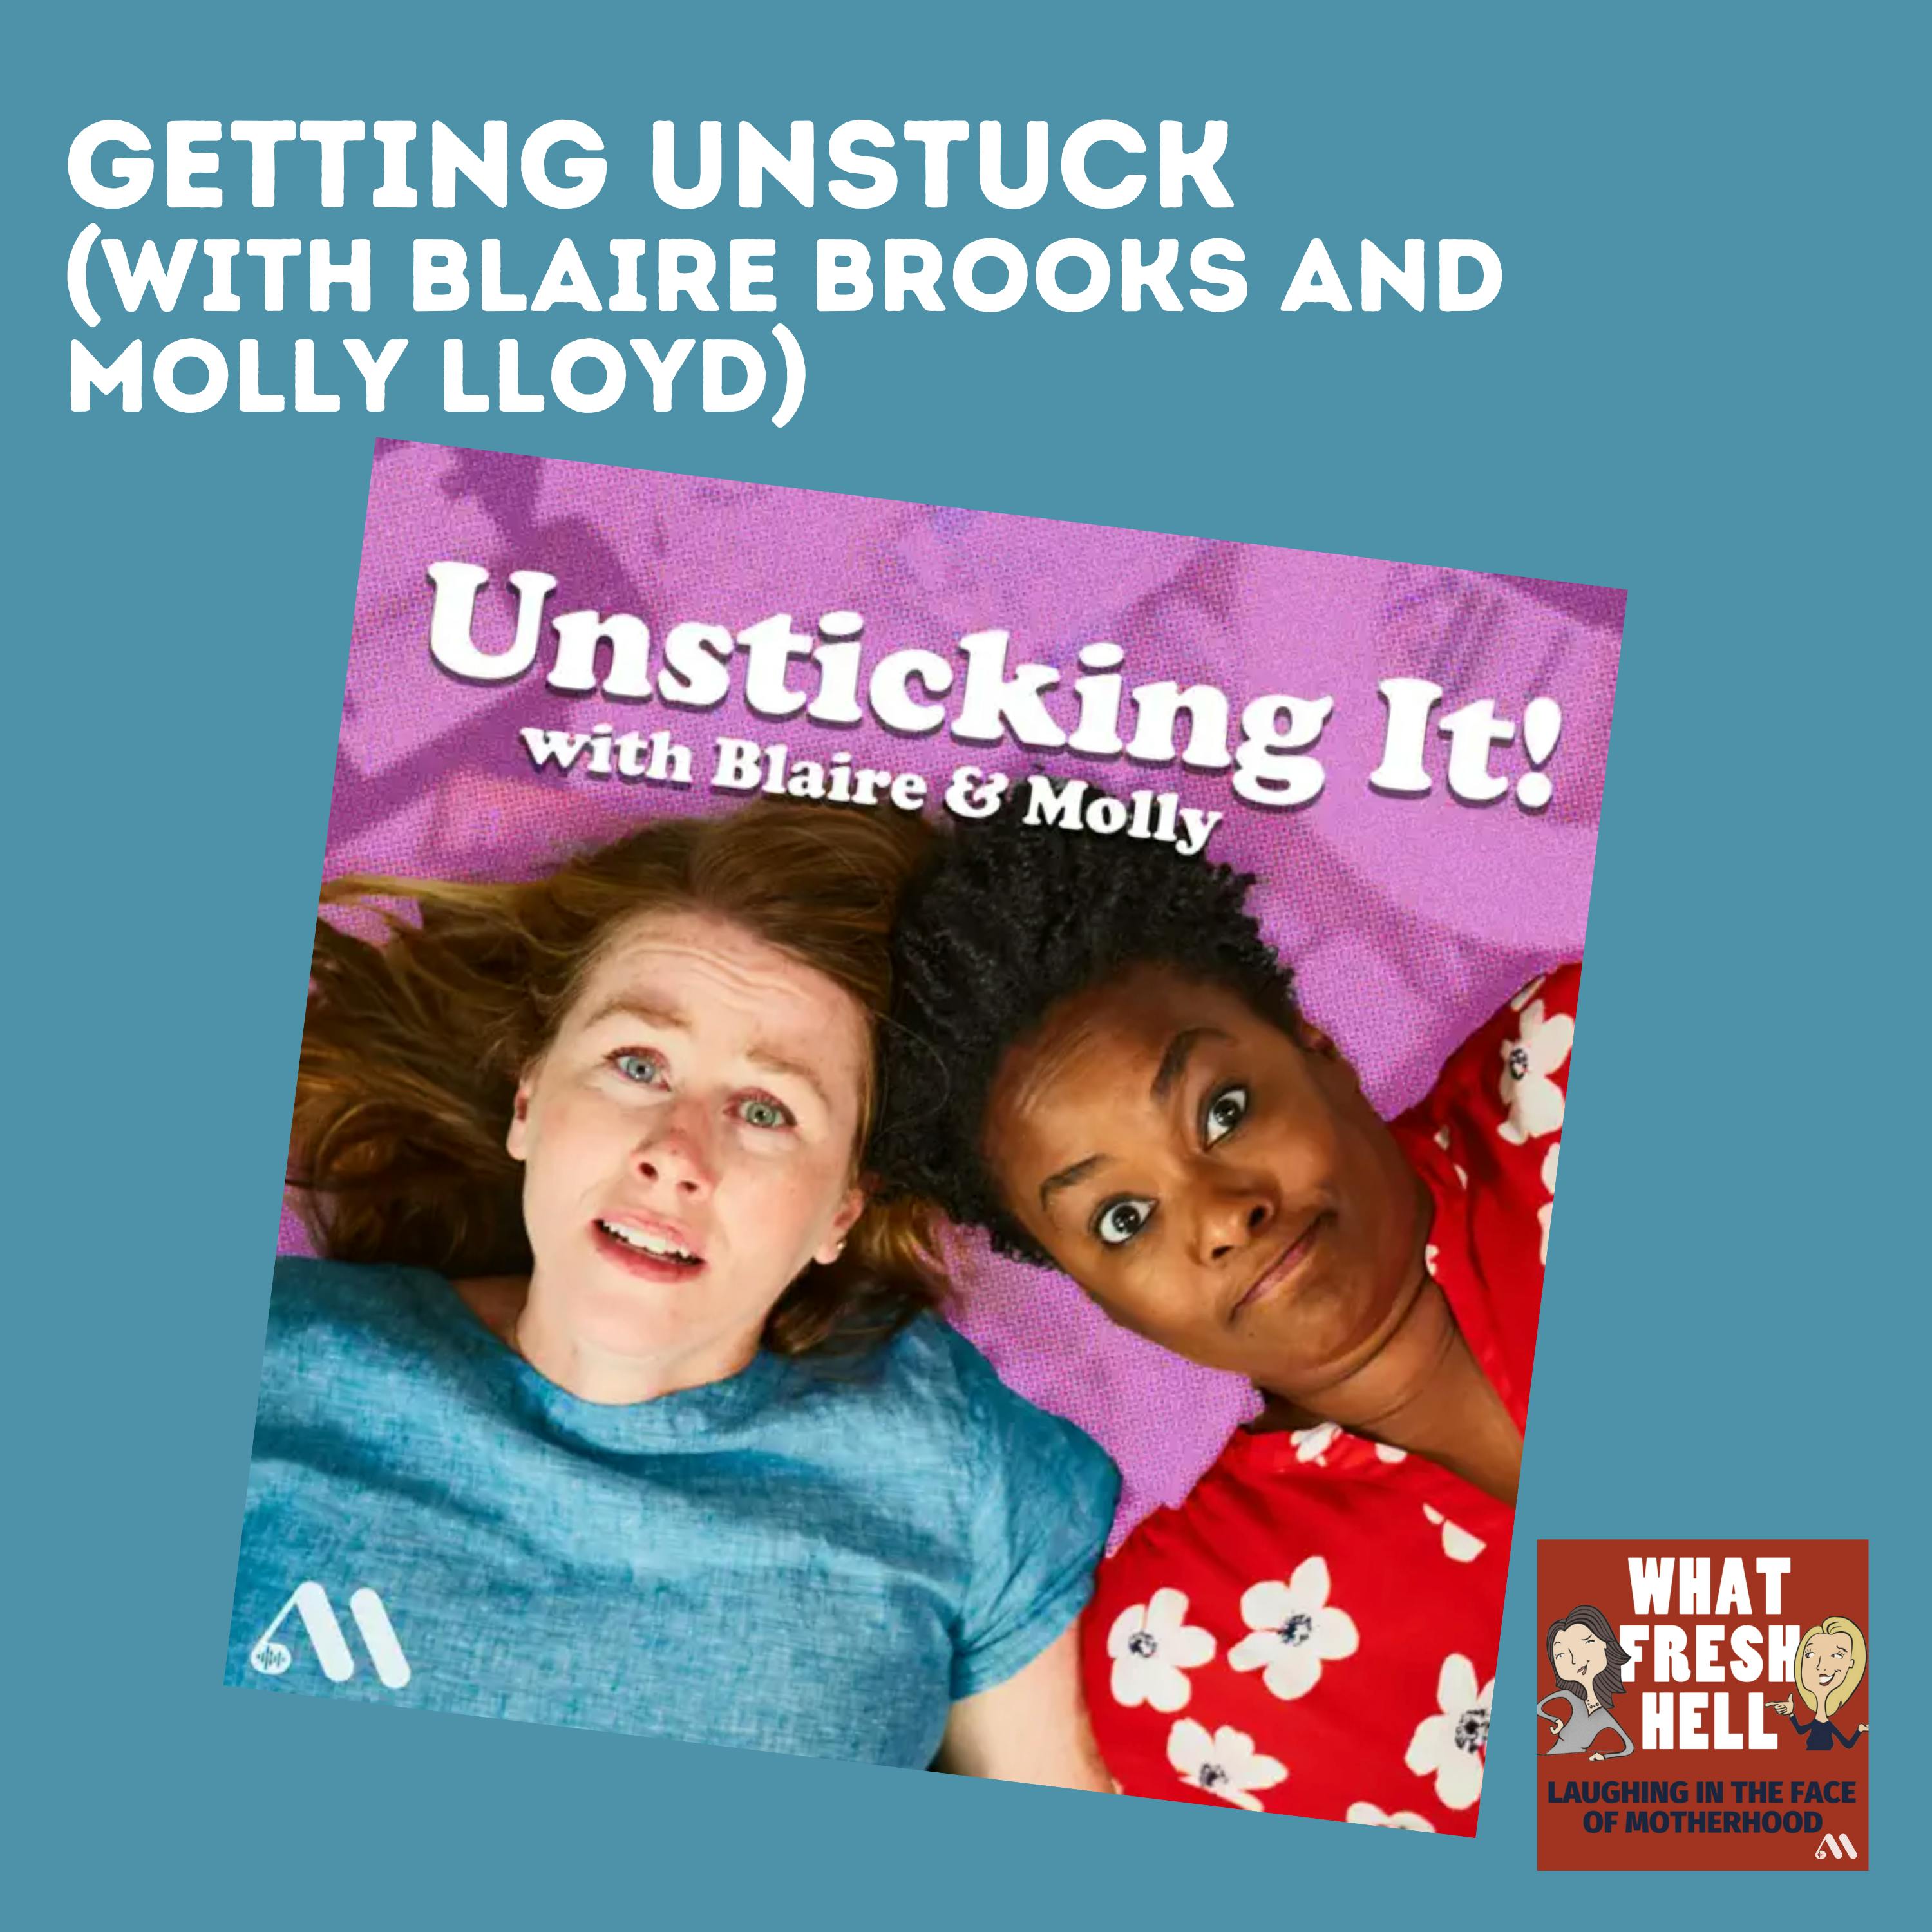 Getting Unstuck (with Blaire and Molly from ”Unsticking It”)